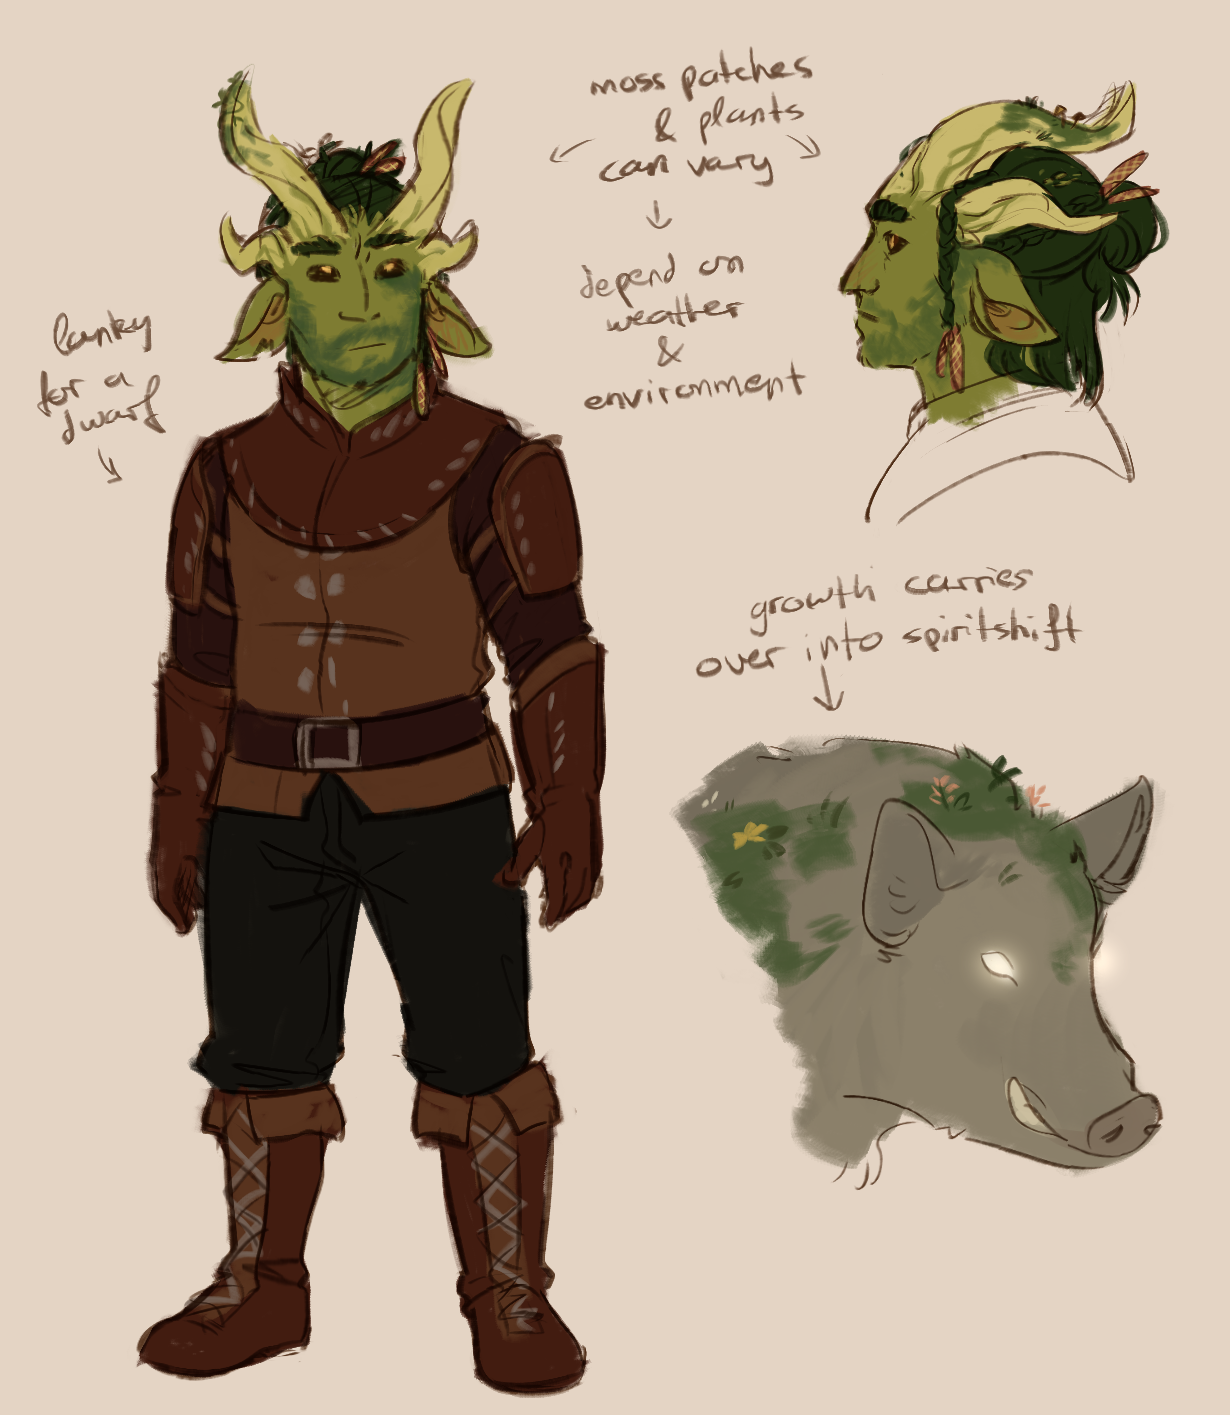 A coloured doodle/pseudo reference sheet of Alder, a dwarven Nature Godlike Watcher, consisting of a fullbody, a profile, and a headshot of his spiritshift, with a few notes.  The fullbody shows him standing in a neutral pose mostly from the front. Alder has green skin and hair, two pairs of horns, floppy faun-like ears, and eyes with dark scleras and glowing irises. He has stubble that resembles moss, as well as patches of moss and small plants growing on his horns, face, and hair. He is wearing simple reddish-brown leather armour.  The profile headshot shows off his downturned nose, and his hair, which is straight, shoulder-length, and partially done up into a bun. Additionally it is interspersed with small braids and woven-in alder flowers.  The boar is mostly plain grey with glowing yellow eyes, and has patches of moss and small plants growing on it as well.  The various notes read: "lanky for a dwarf" "moss patches and plants can very" with an arrow to "depend on weather and environment" "growth carries over into spiritshift"